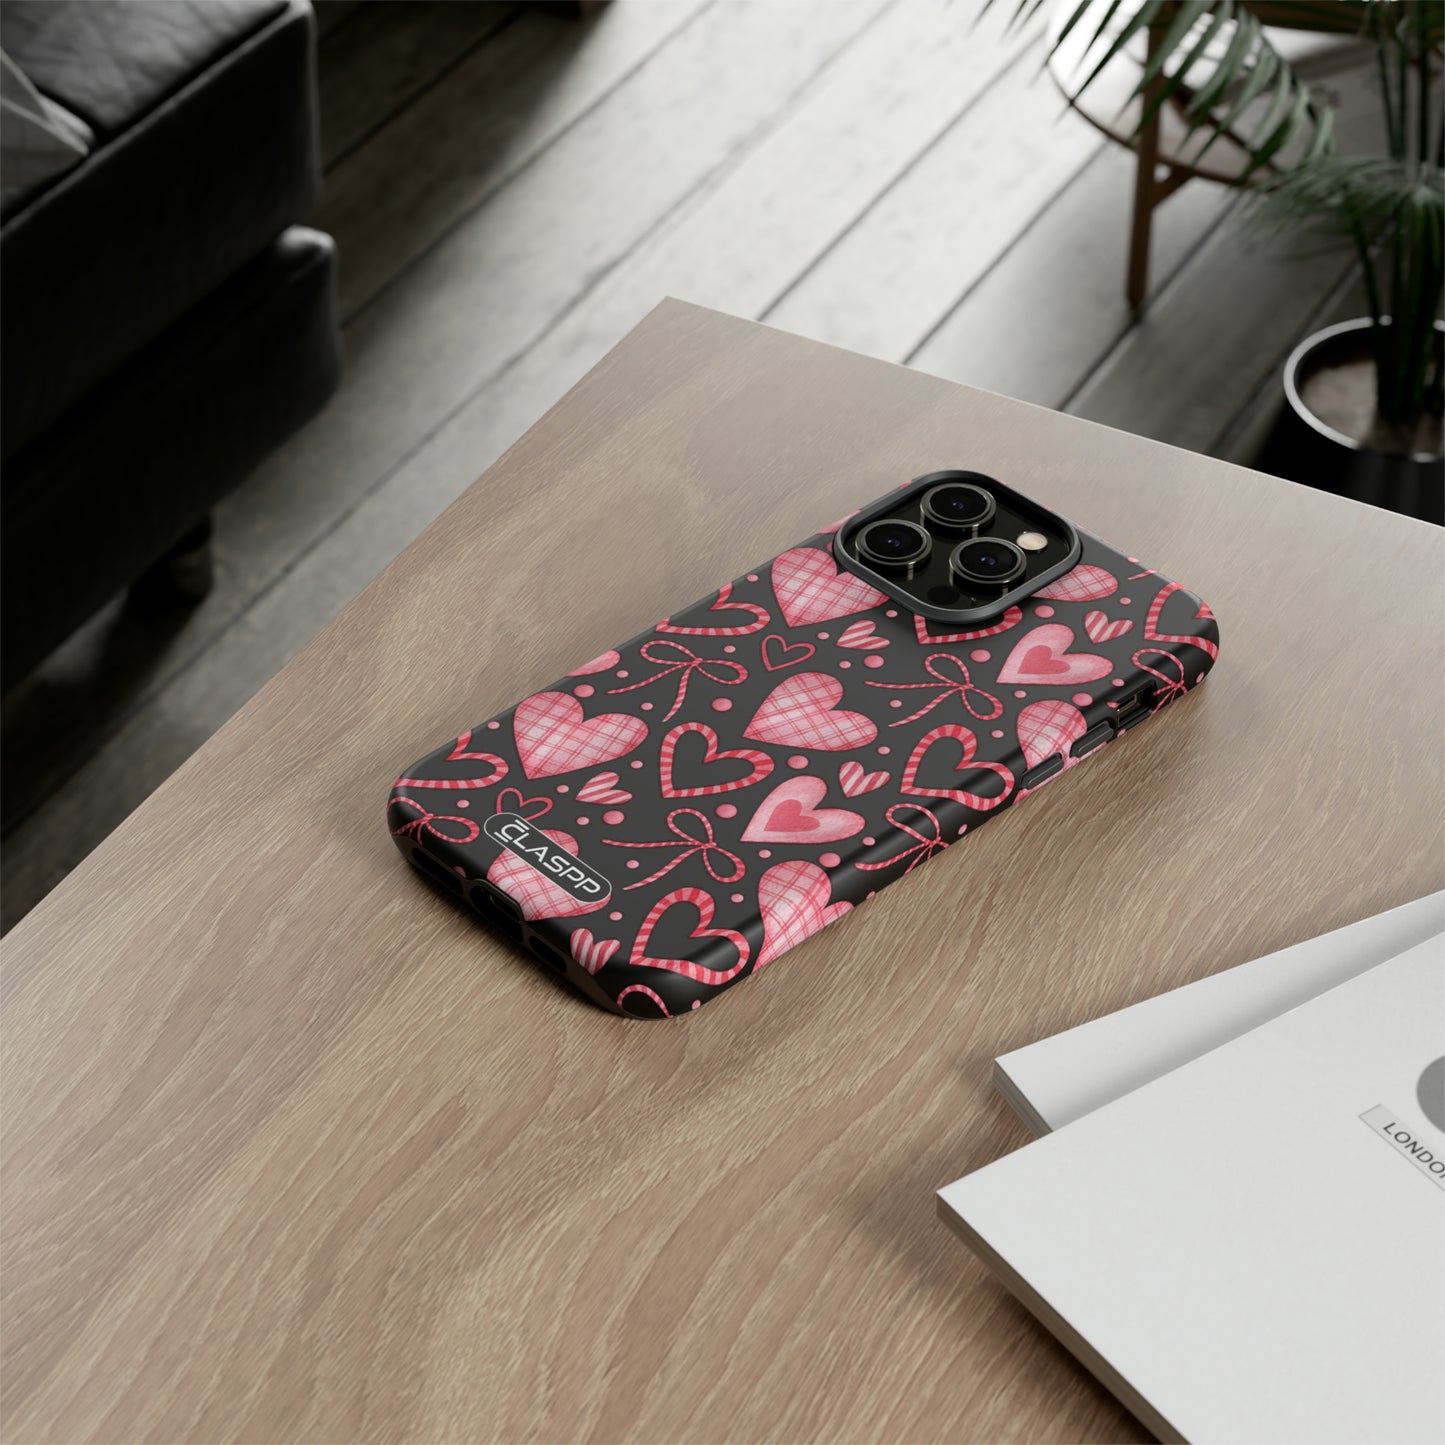 Heartbeat Haven | Valentine's Day | Hardshell Dual Layer Phone Case